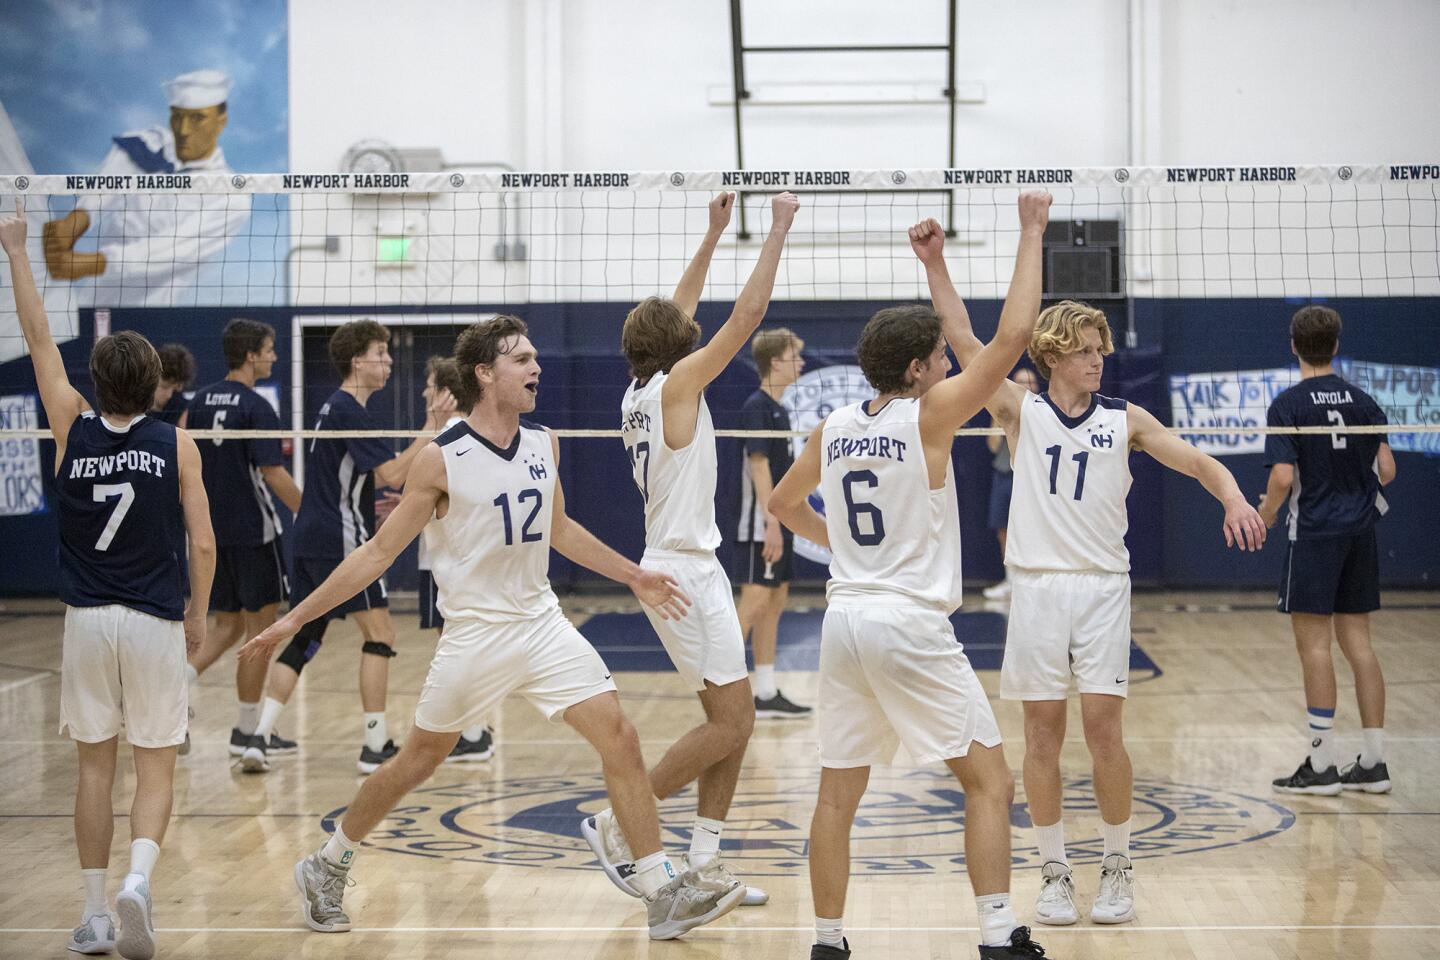 Newport Harbor players celebrate after beating Los Angeles Loyola 27-29, 24-26, 25-19, 25-13, 15-9 during the CIF State Southern California Regional Division I semifinal playoff match in Newport Beach on Thursday.